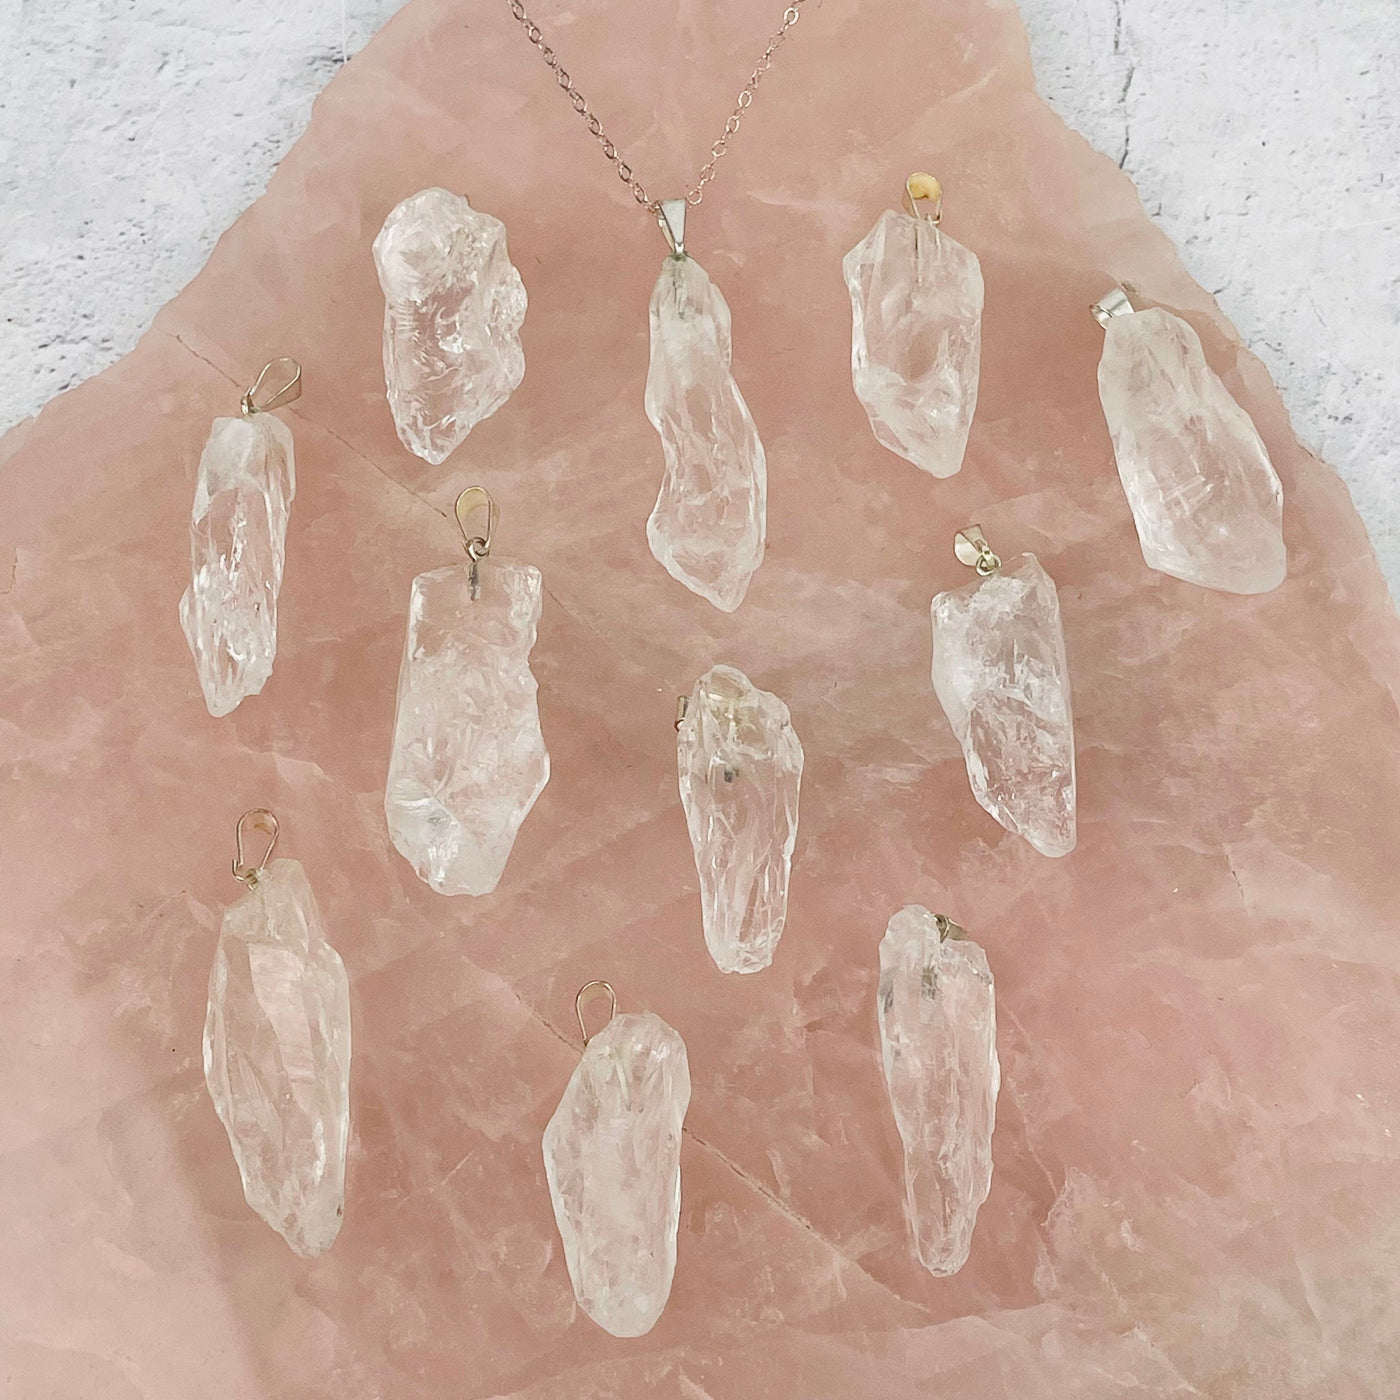 Crystal Quartz - Rough Stone Pendants with Silver Plated Bails displayed to show the differences in the sizes and shapes 